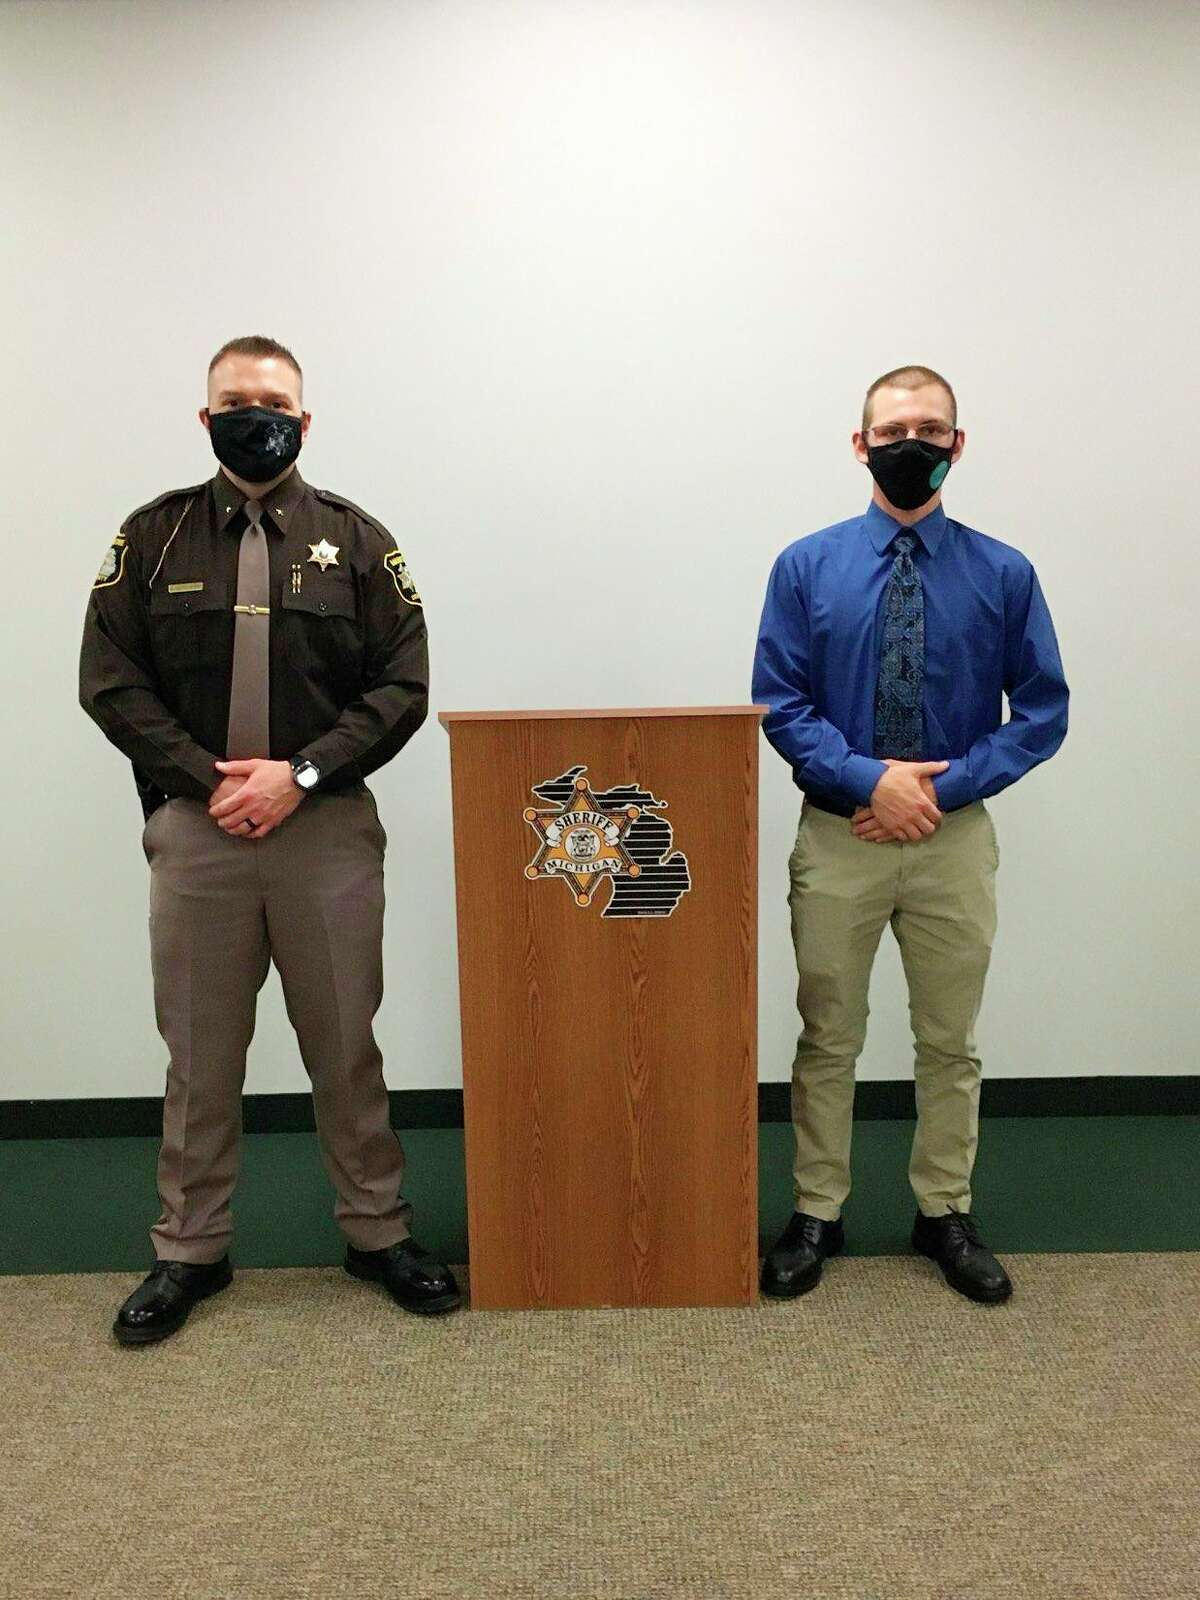 Brendan Cook (right) stands near Manistee County Sheriff Brian Gutowski during an orientation for the Manistee County Sheriff's Office's new apprenticeship program that started this month. (Courtesy photo)